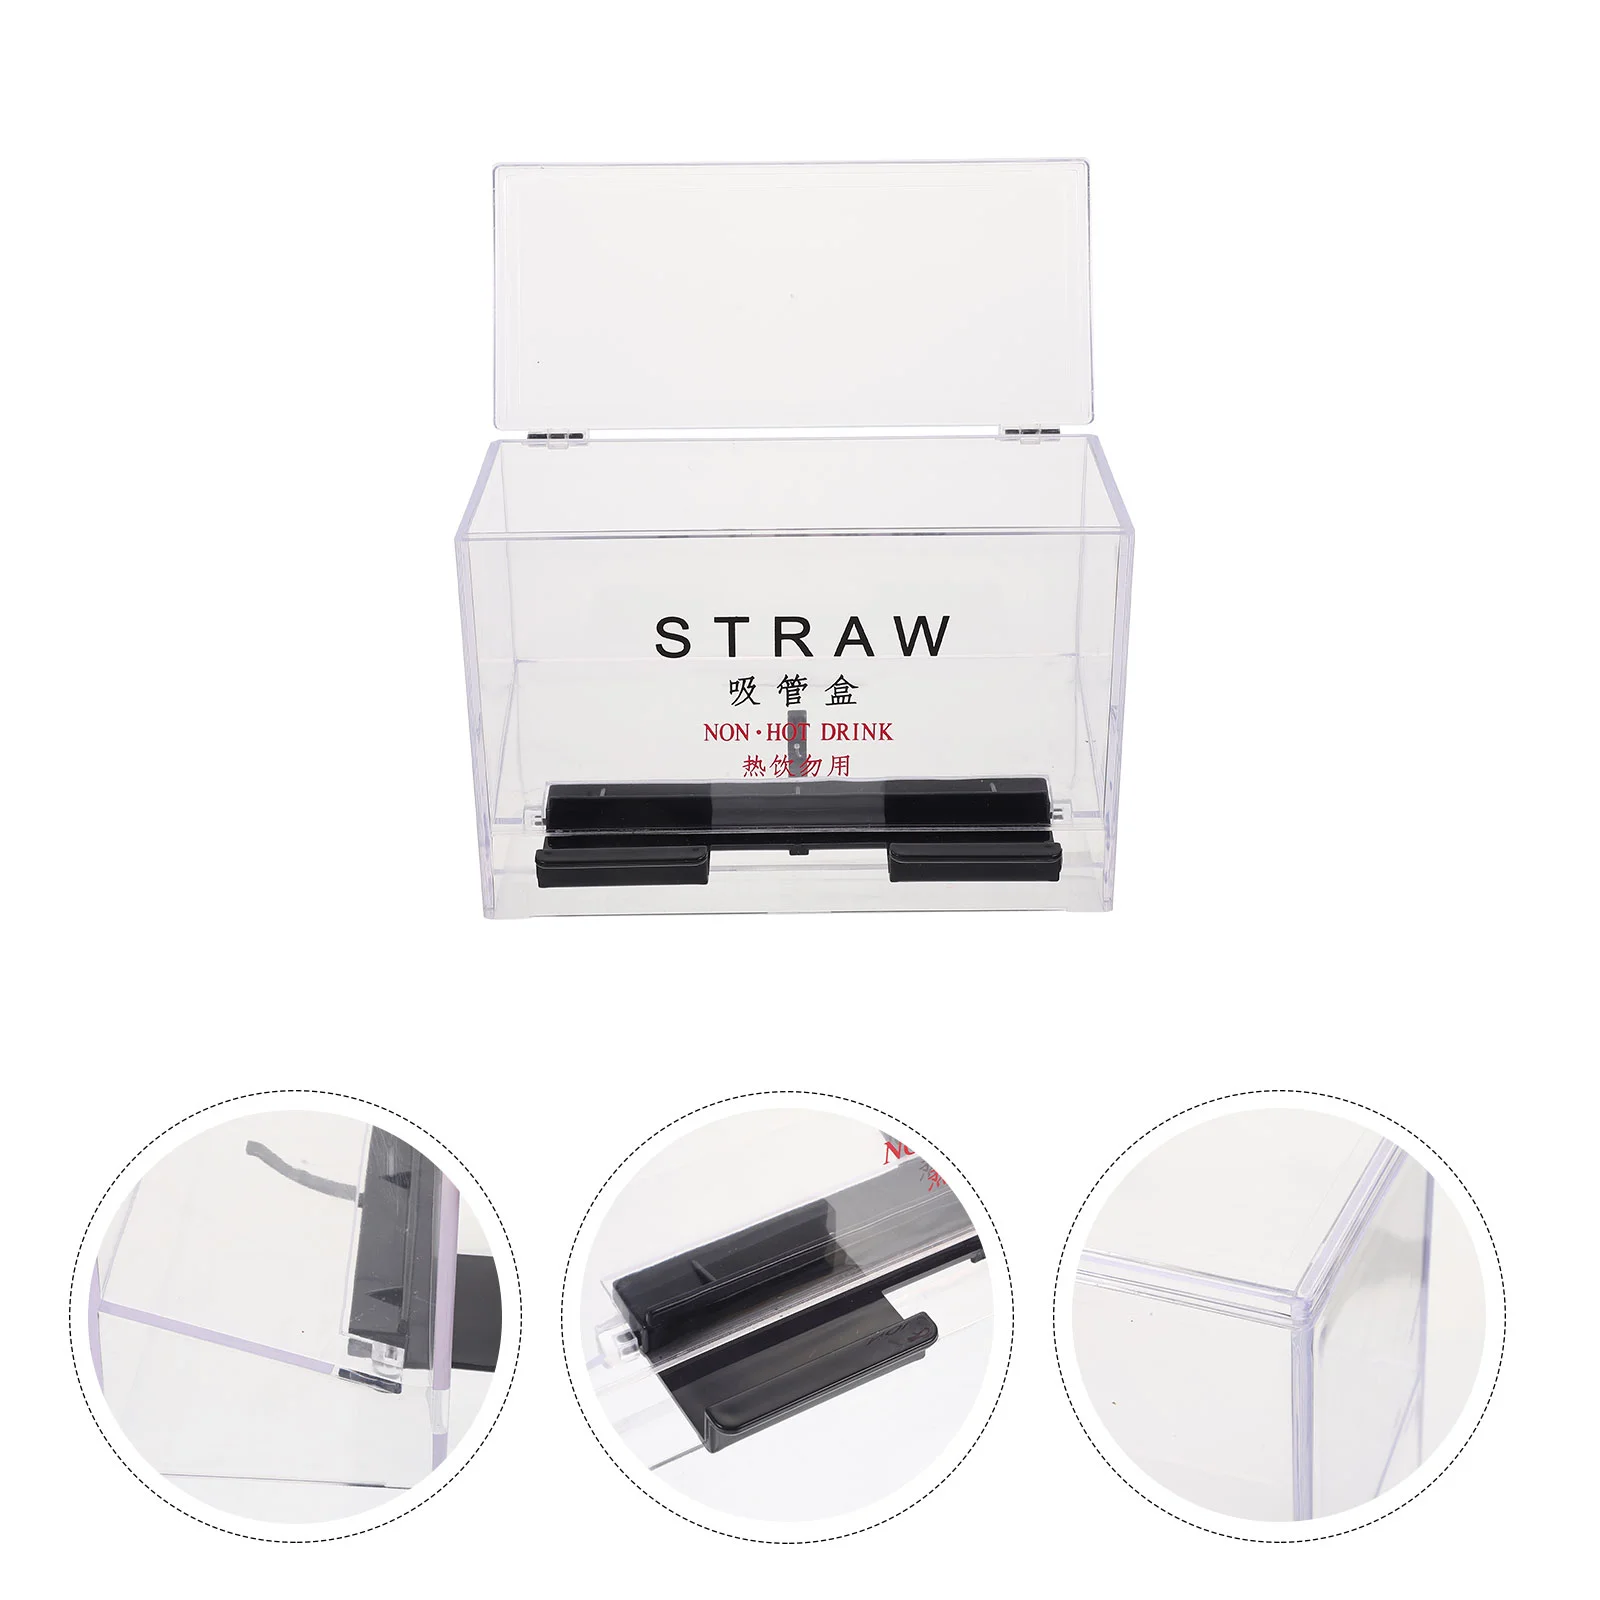 

Self-service Straw Box Drinking Dispensers Pressing Container Straws Acrylic Reusable Restaurant Holder Plastic Go Containers